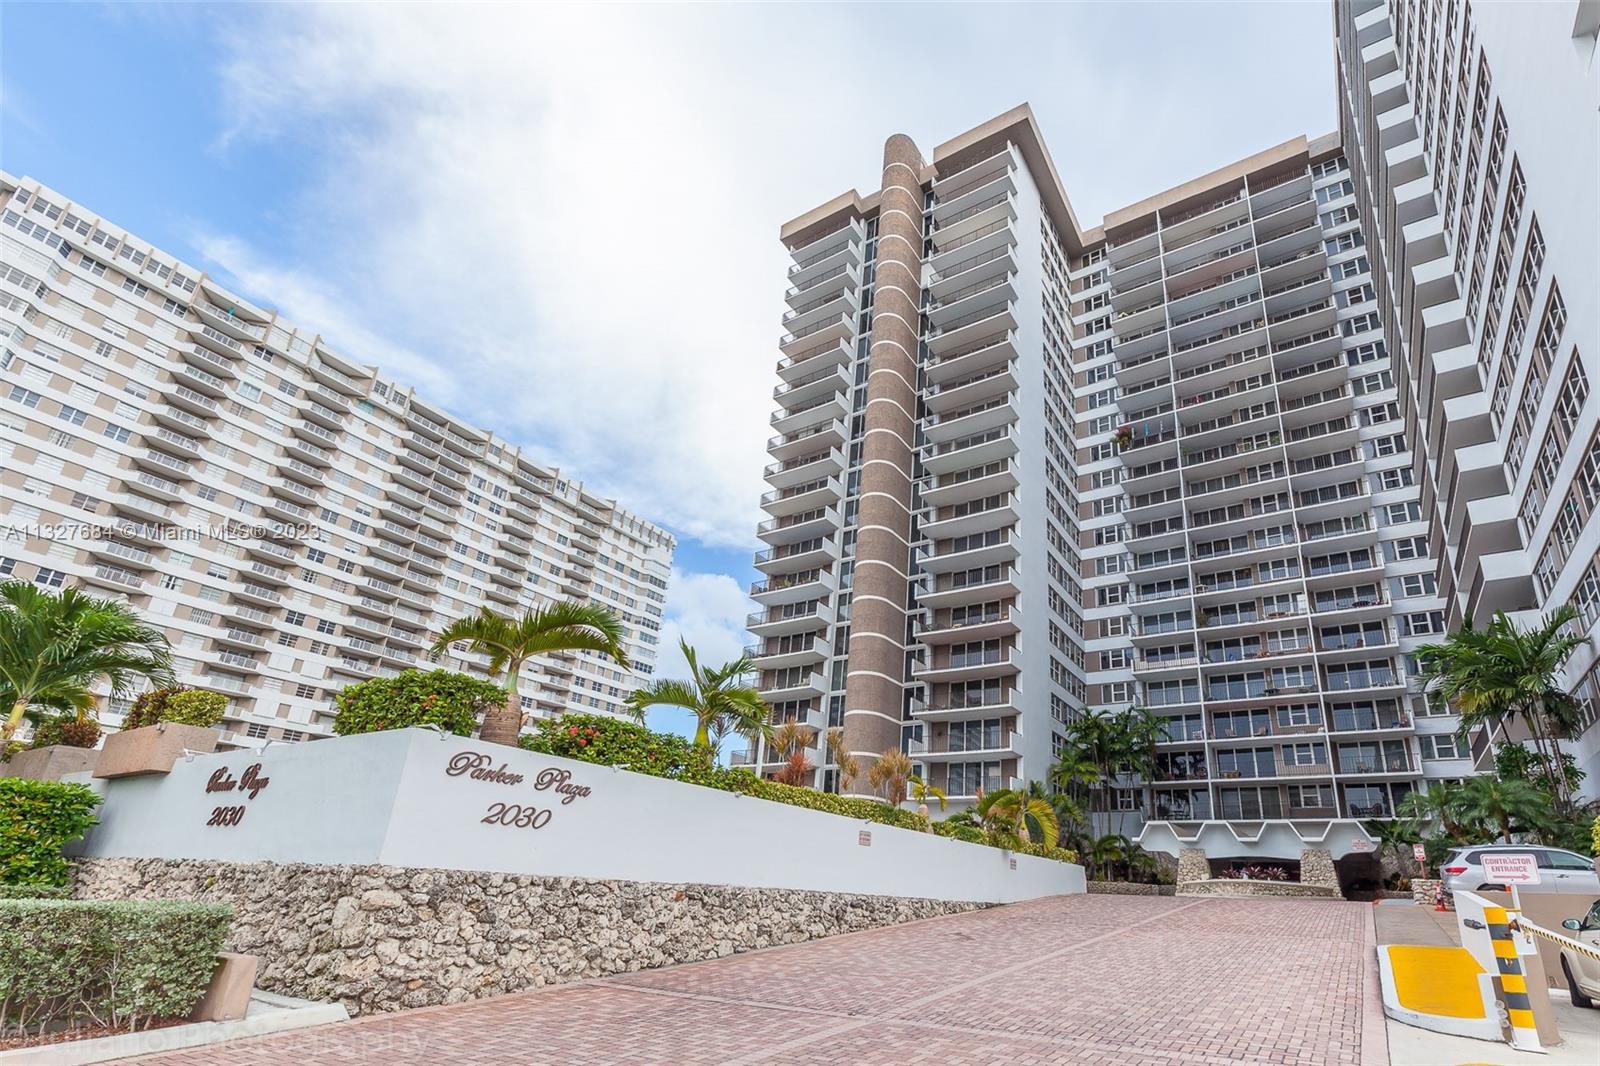 LOCATED IN PRESTIGIOUS PARKER PLAZA AN OCEANFRONT BUILDING. SKYLINE VIEW FROM TERRACE WITH BEAUTIFUL